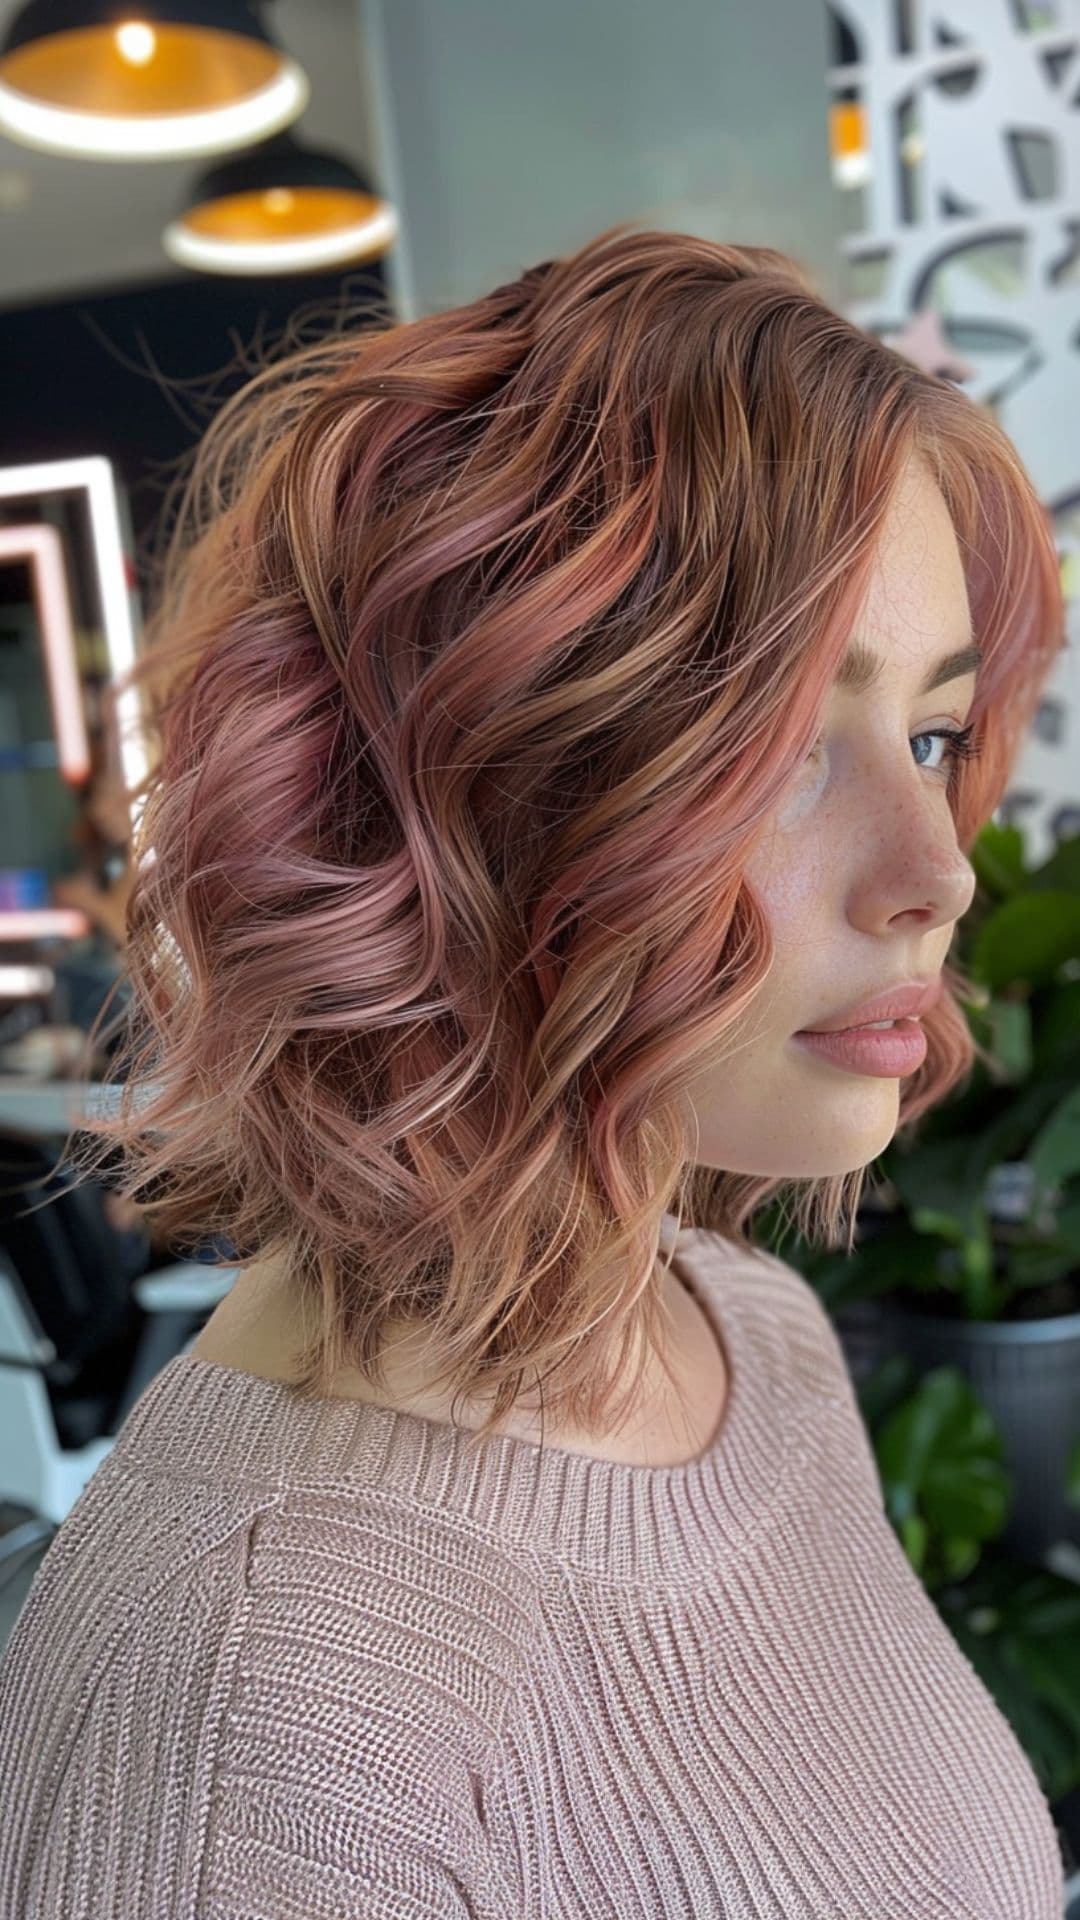 A woman modelling a short rose gold hair.